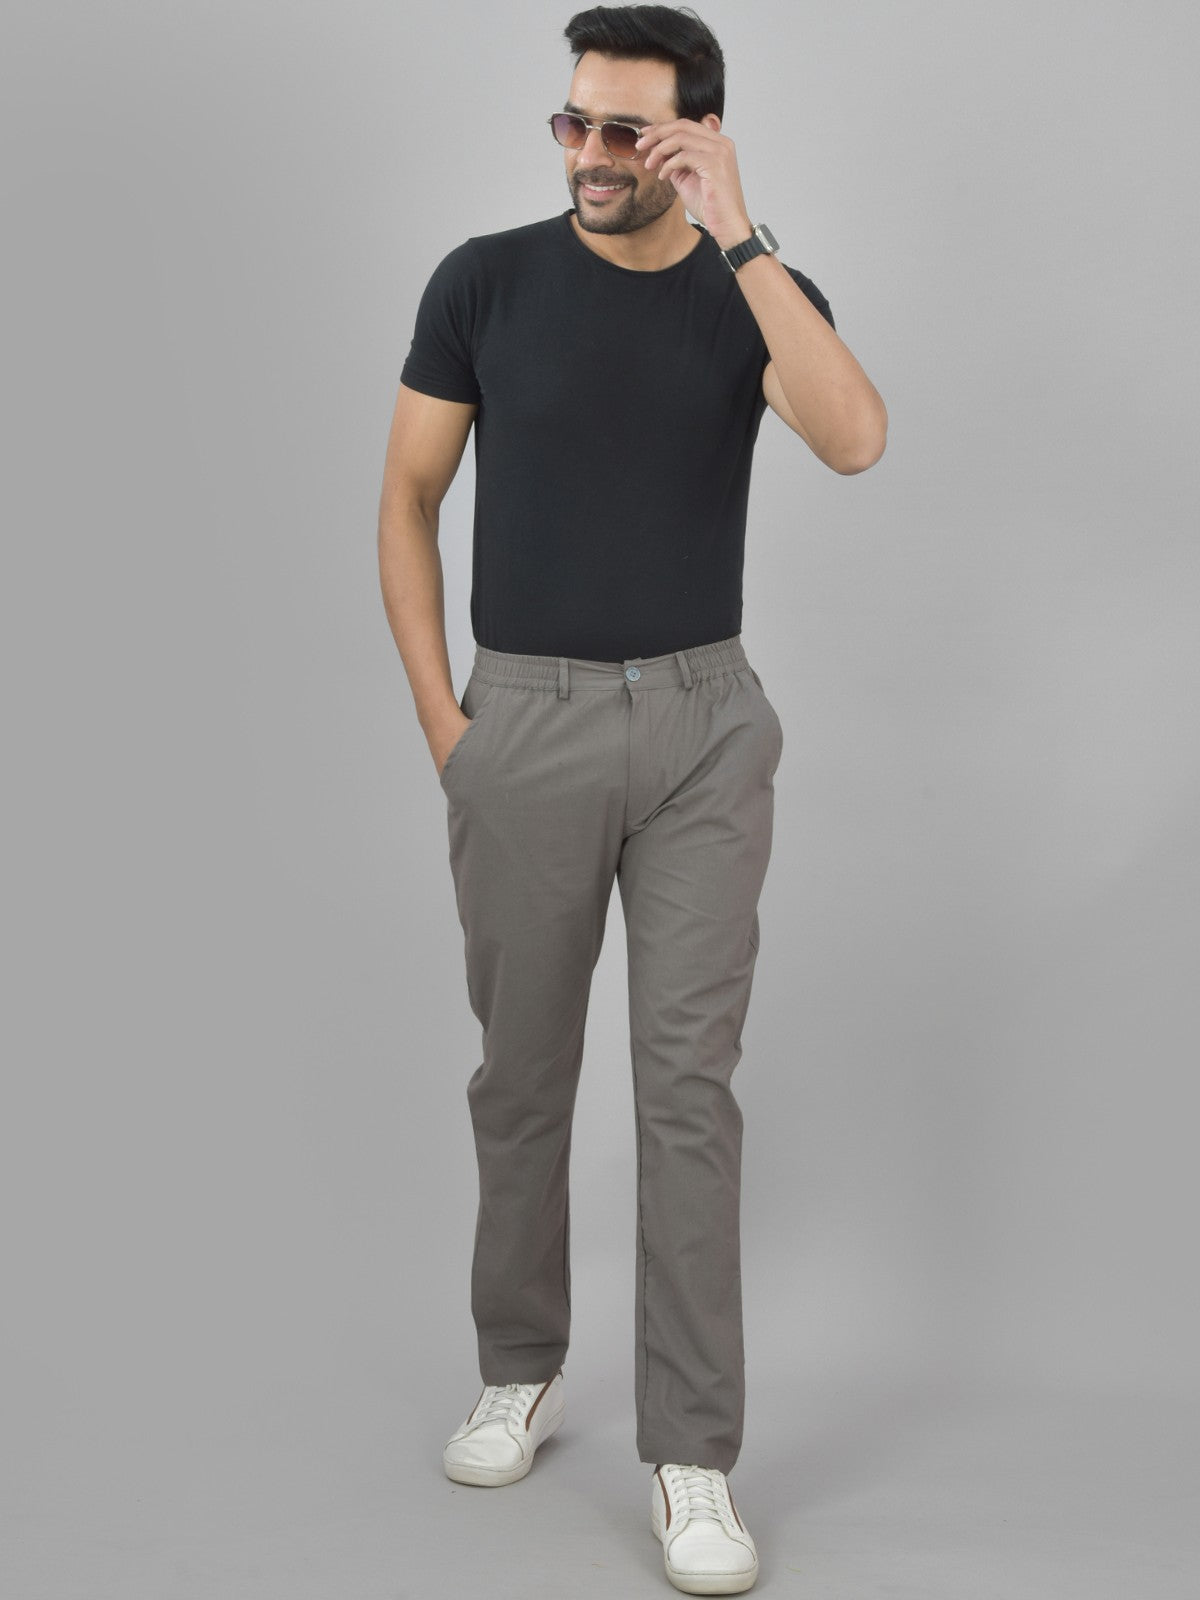 Combo Pack Of Mens Black And Grey Regualr Fit Cotton Trousers